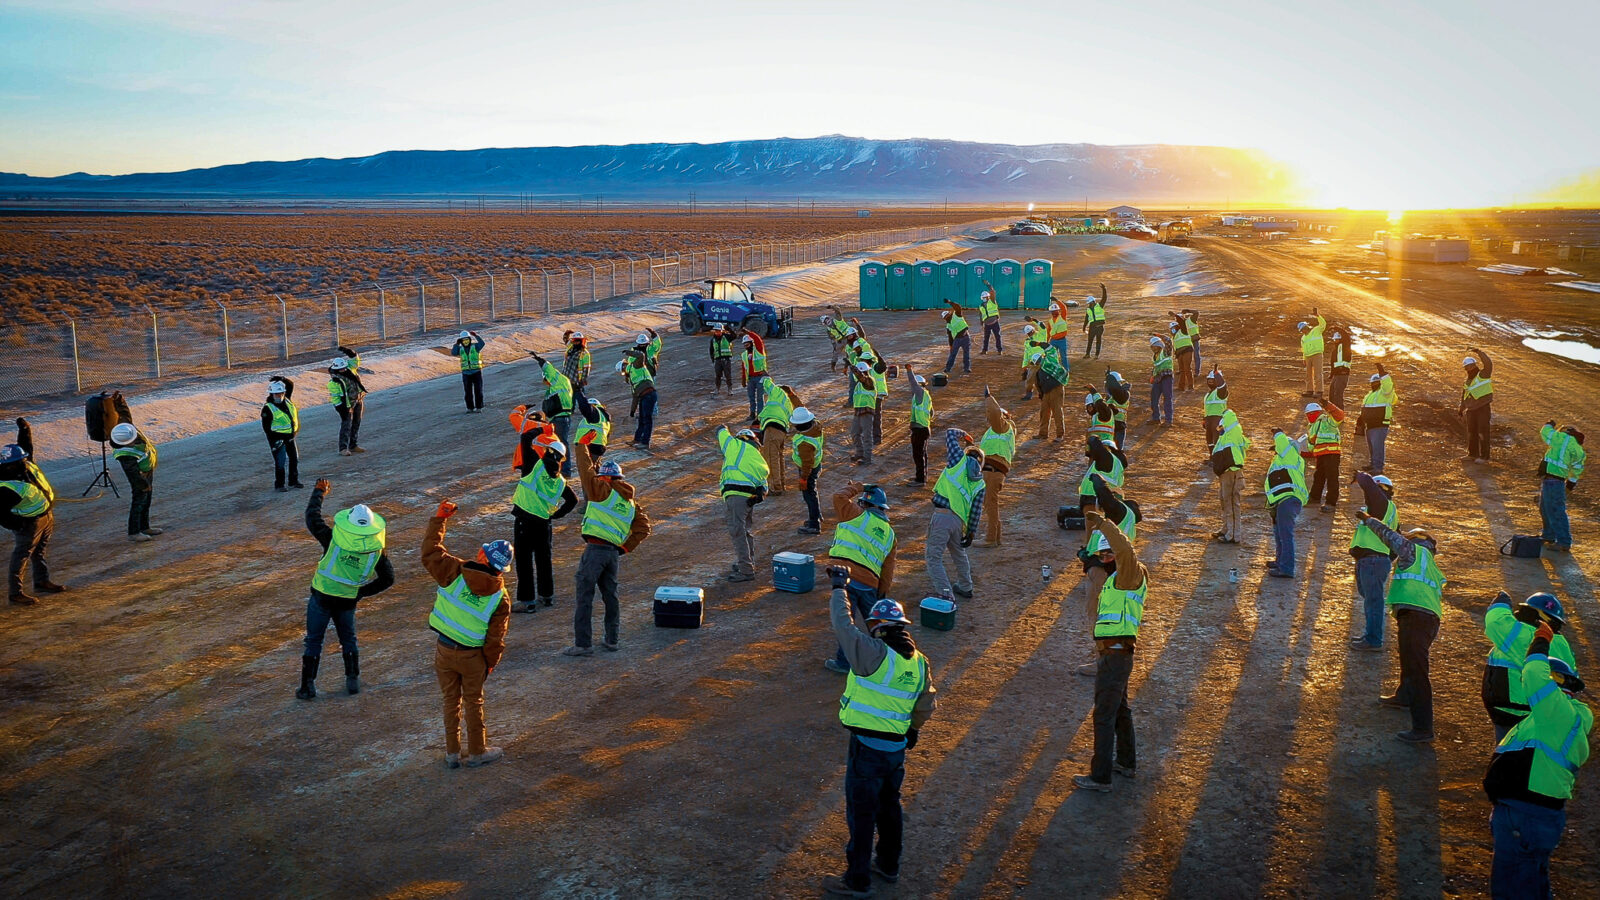 Group of MYRE Energy employees stretching prior to work